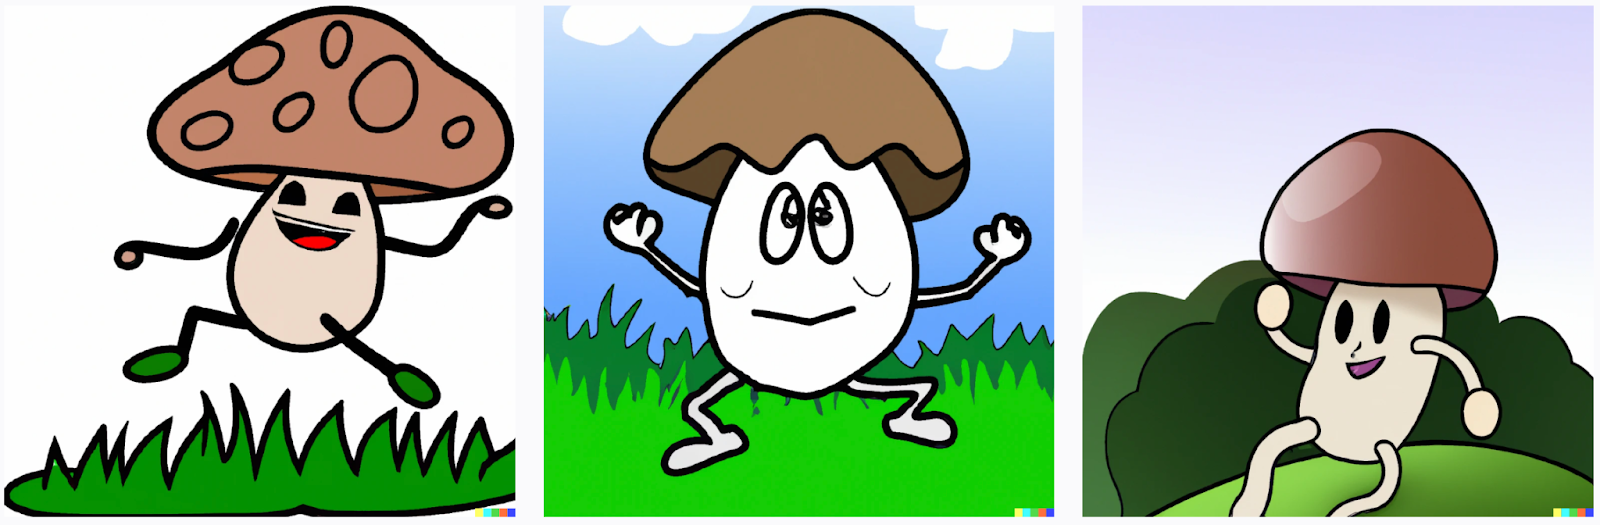 image results for “A happy mushroom skipping through a meadow with legs and a face” prompt